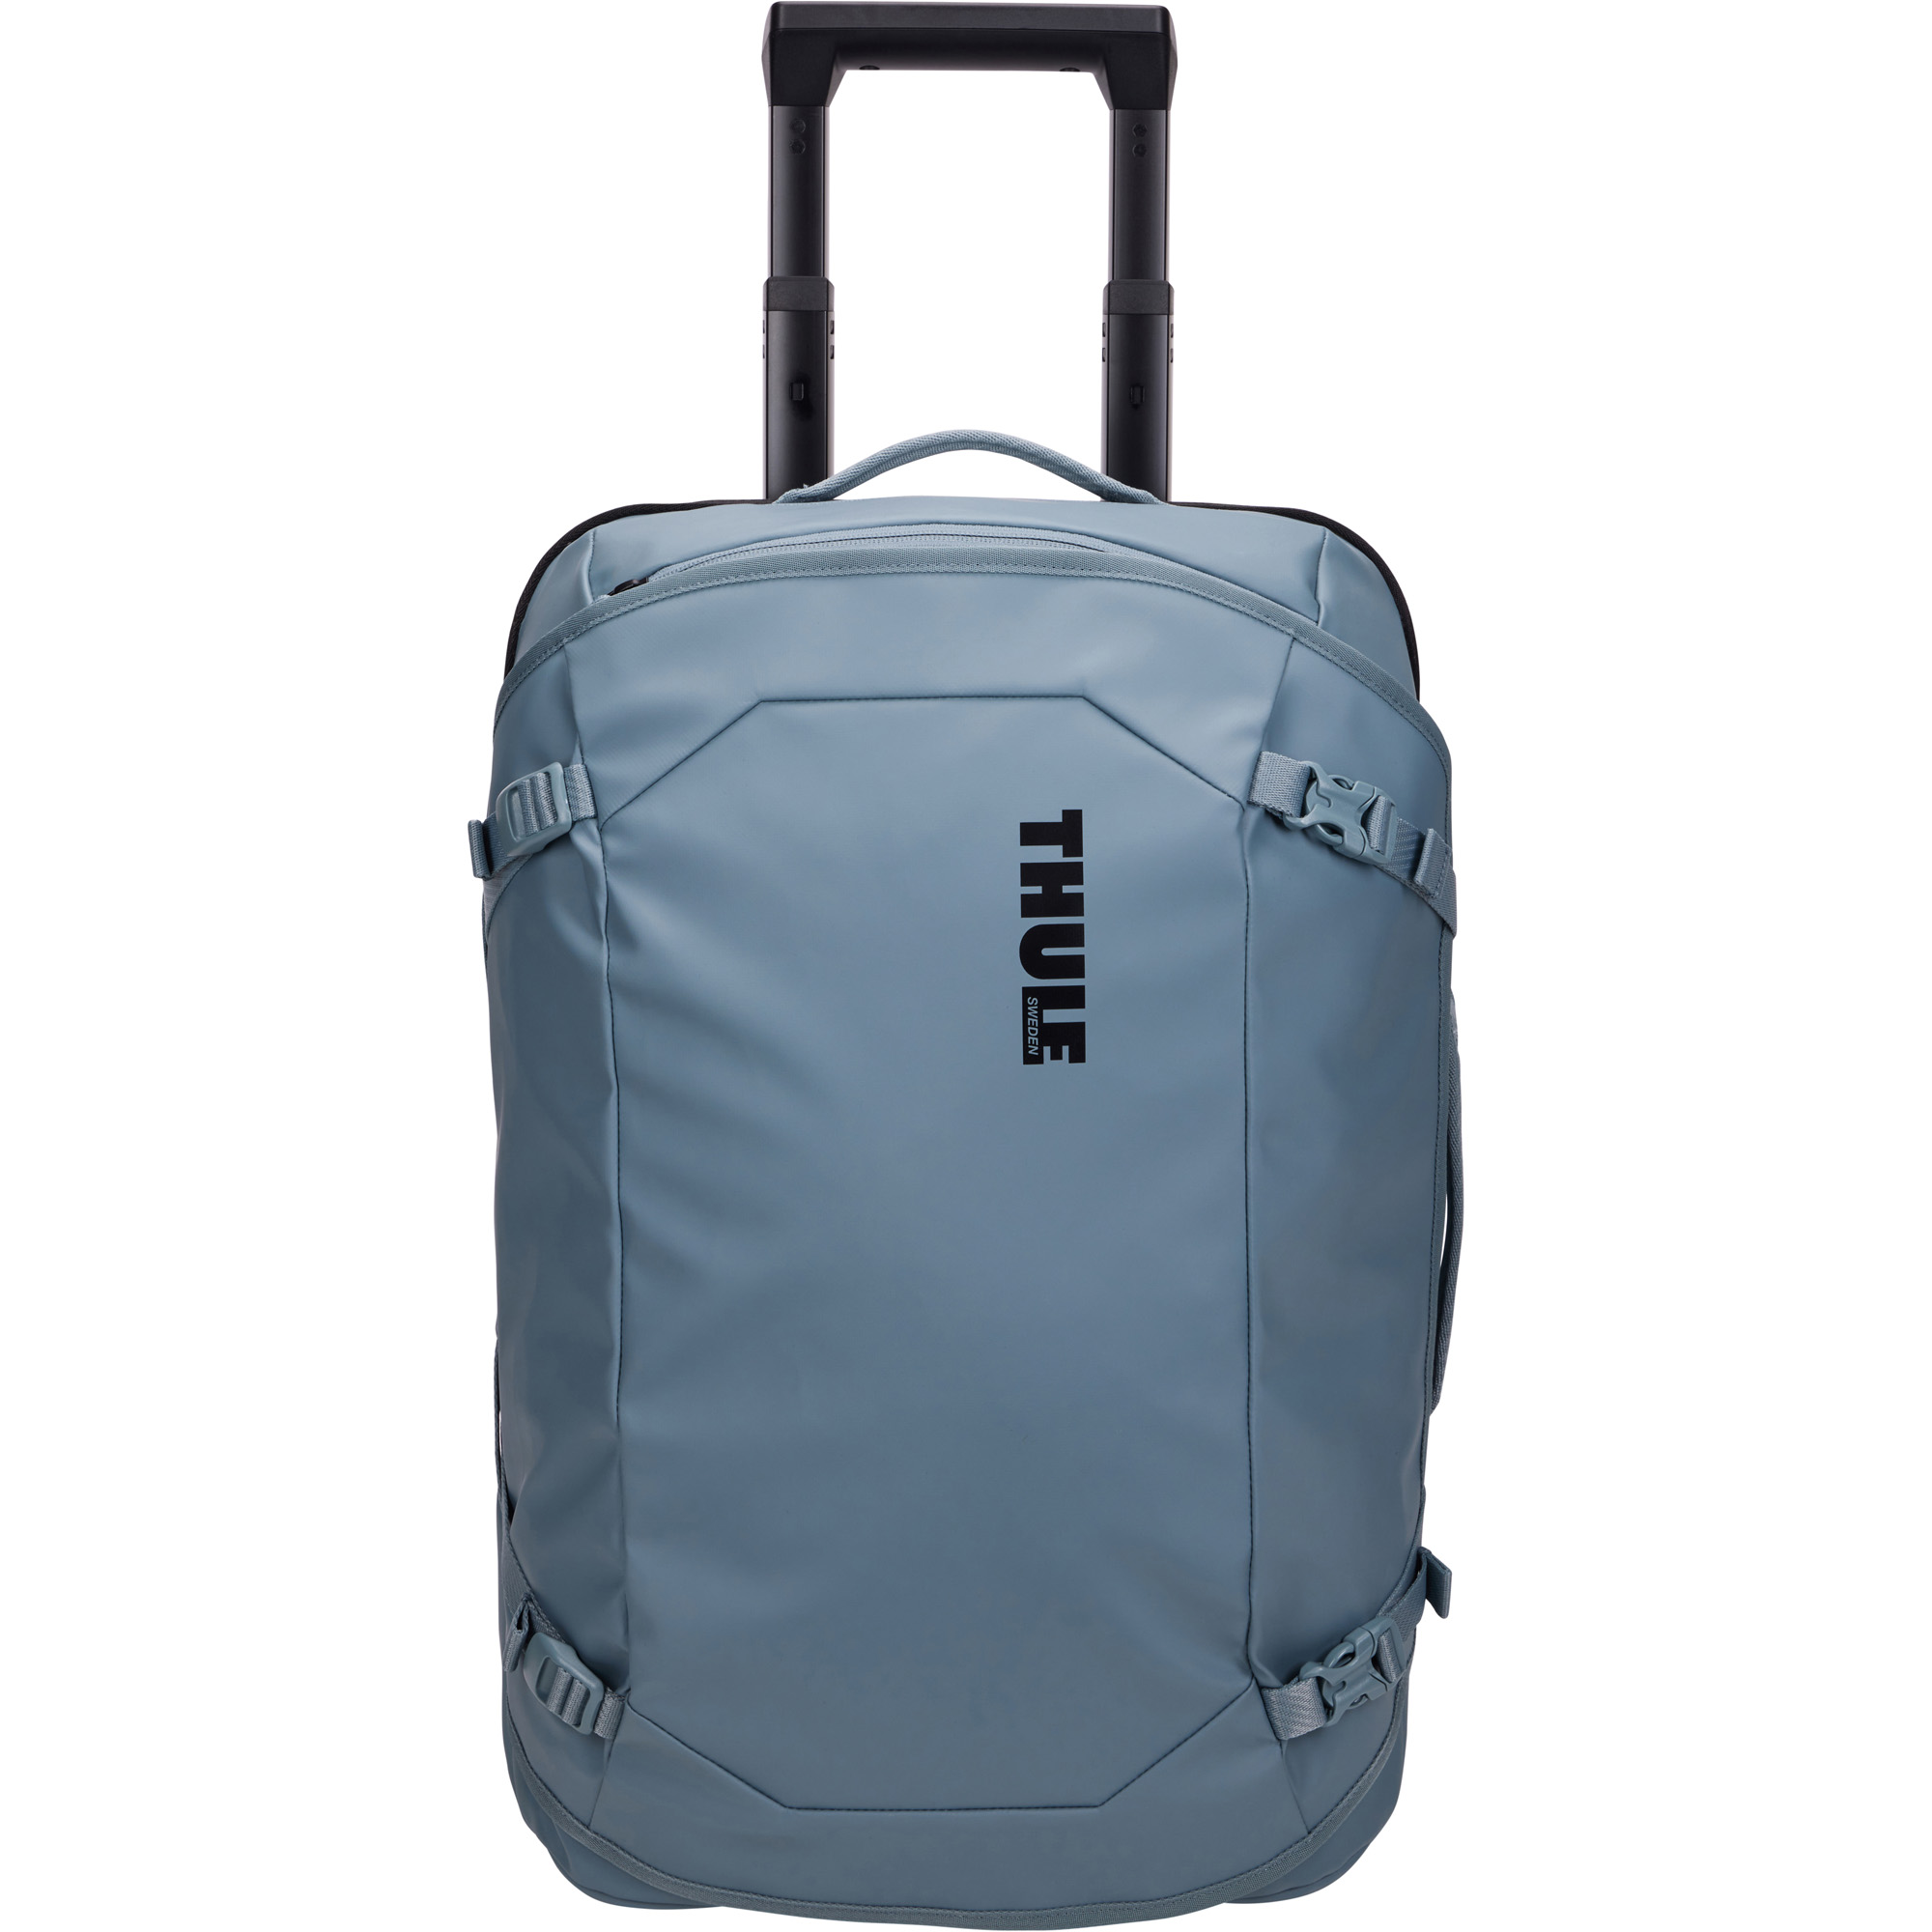 Thule Chasm 40L Carry-On Luggage